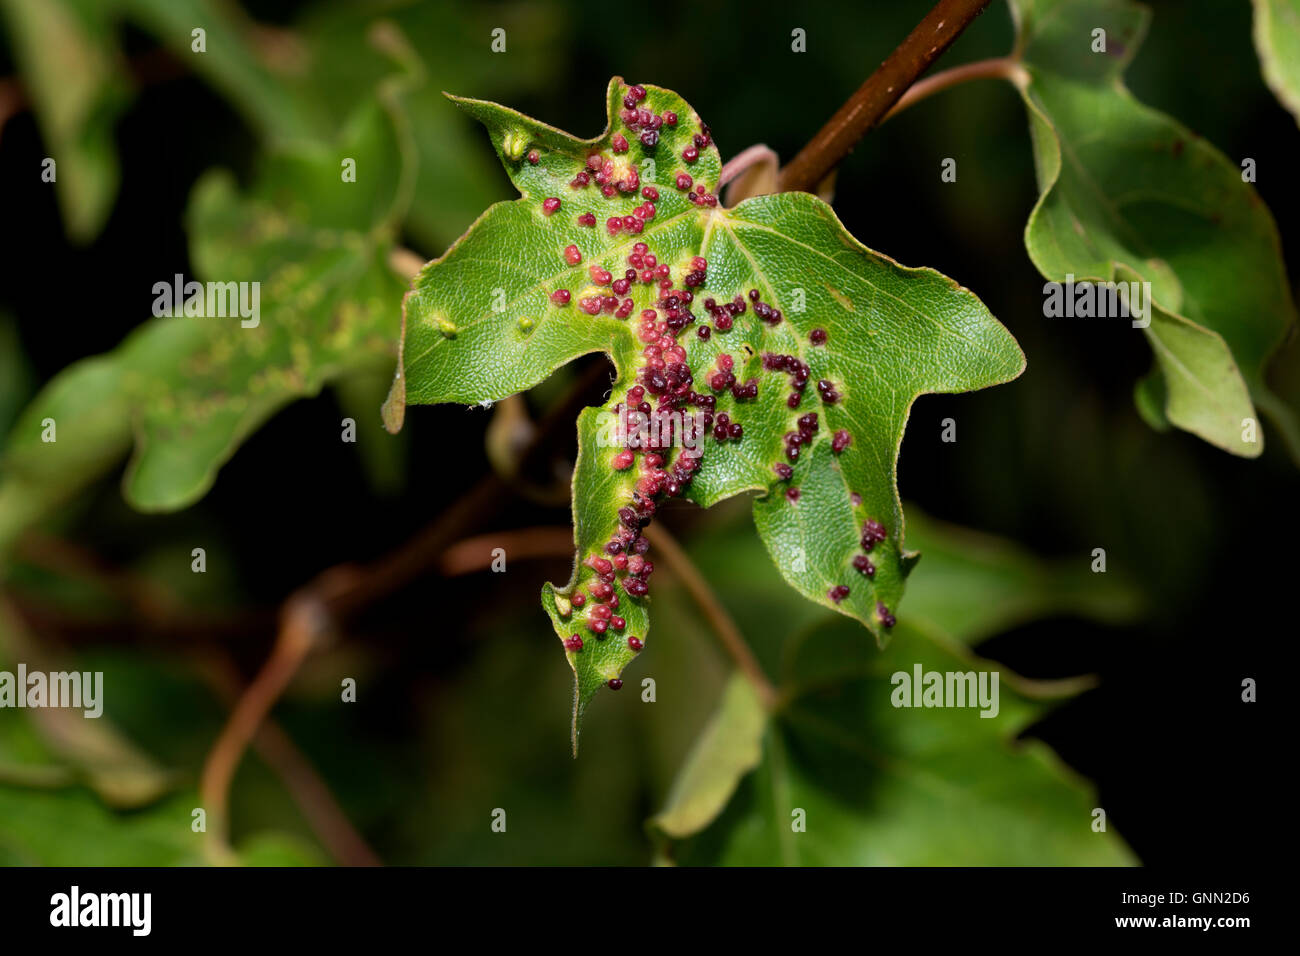 Red Pustule Gall Mite on Field Maple Stock Photo